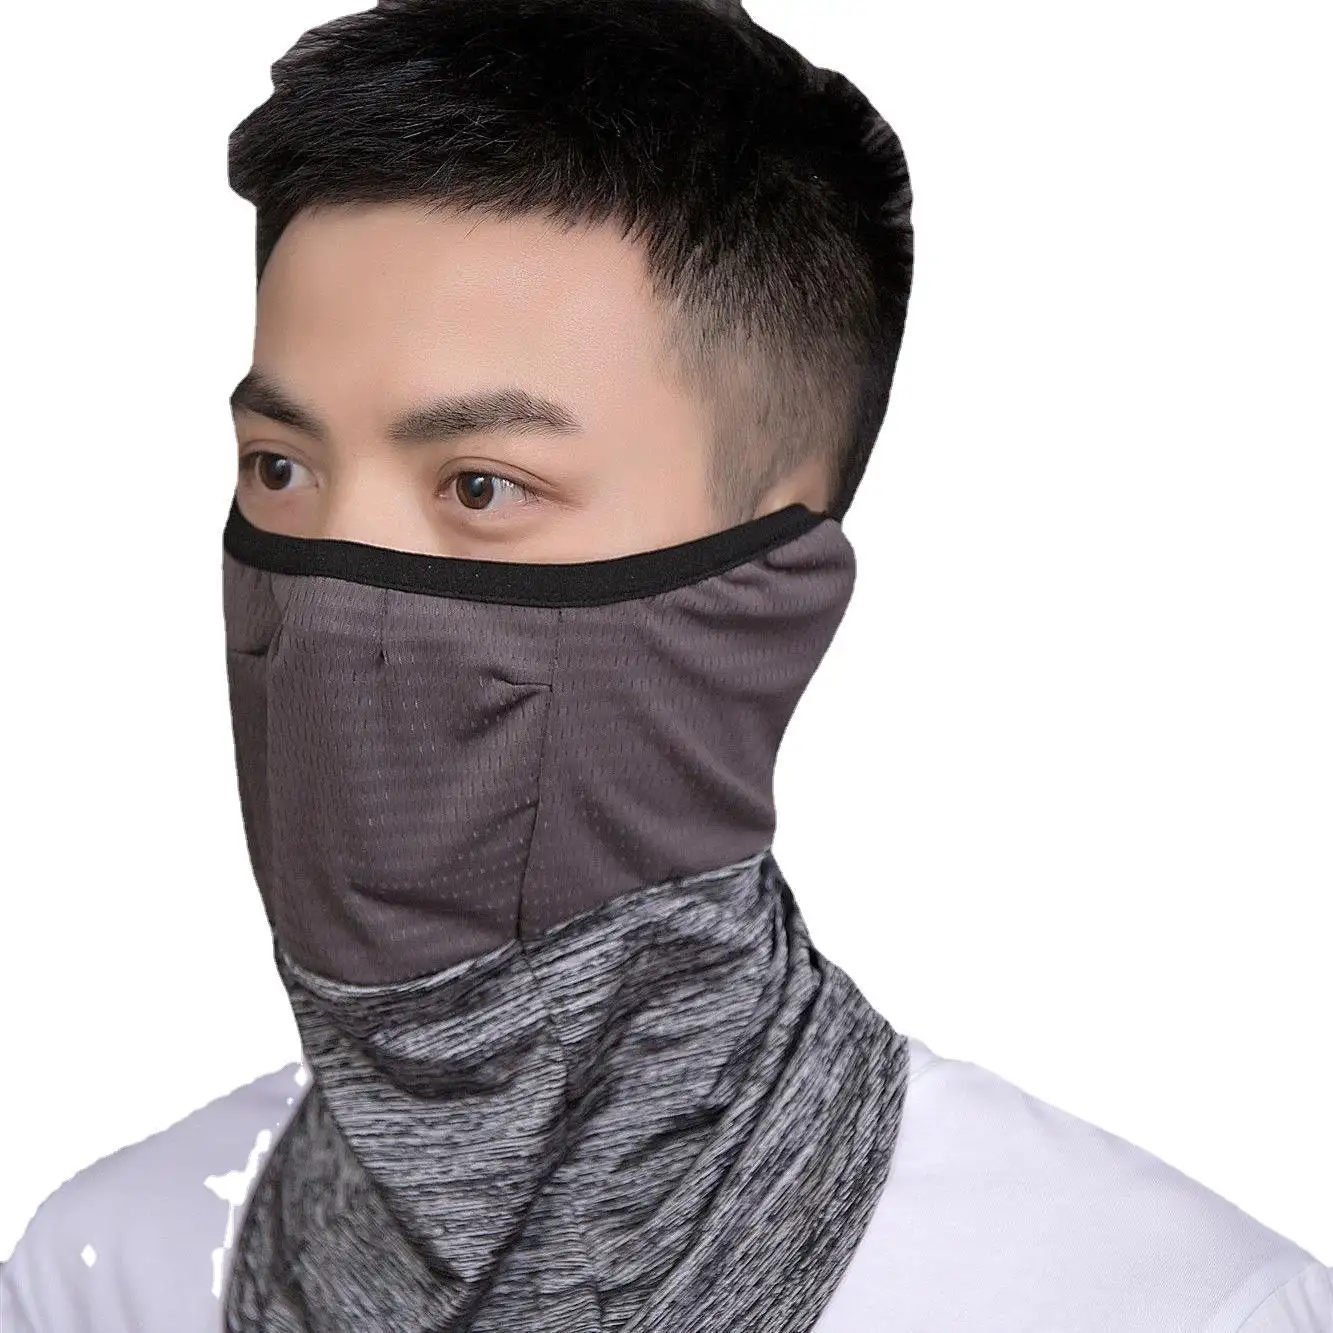 Seamless Tie Dye Scarf Mask Sport Outdoor Cool Breathing Fishing Face Sports Mask